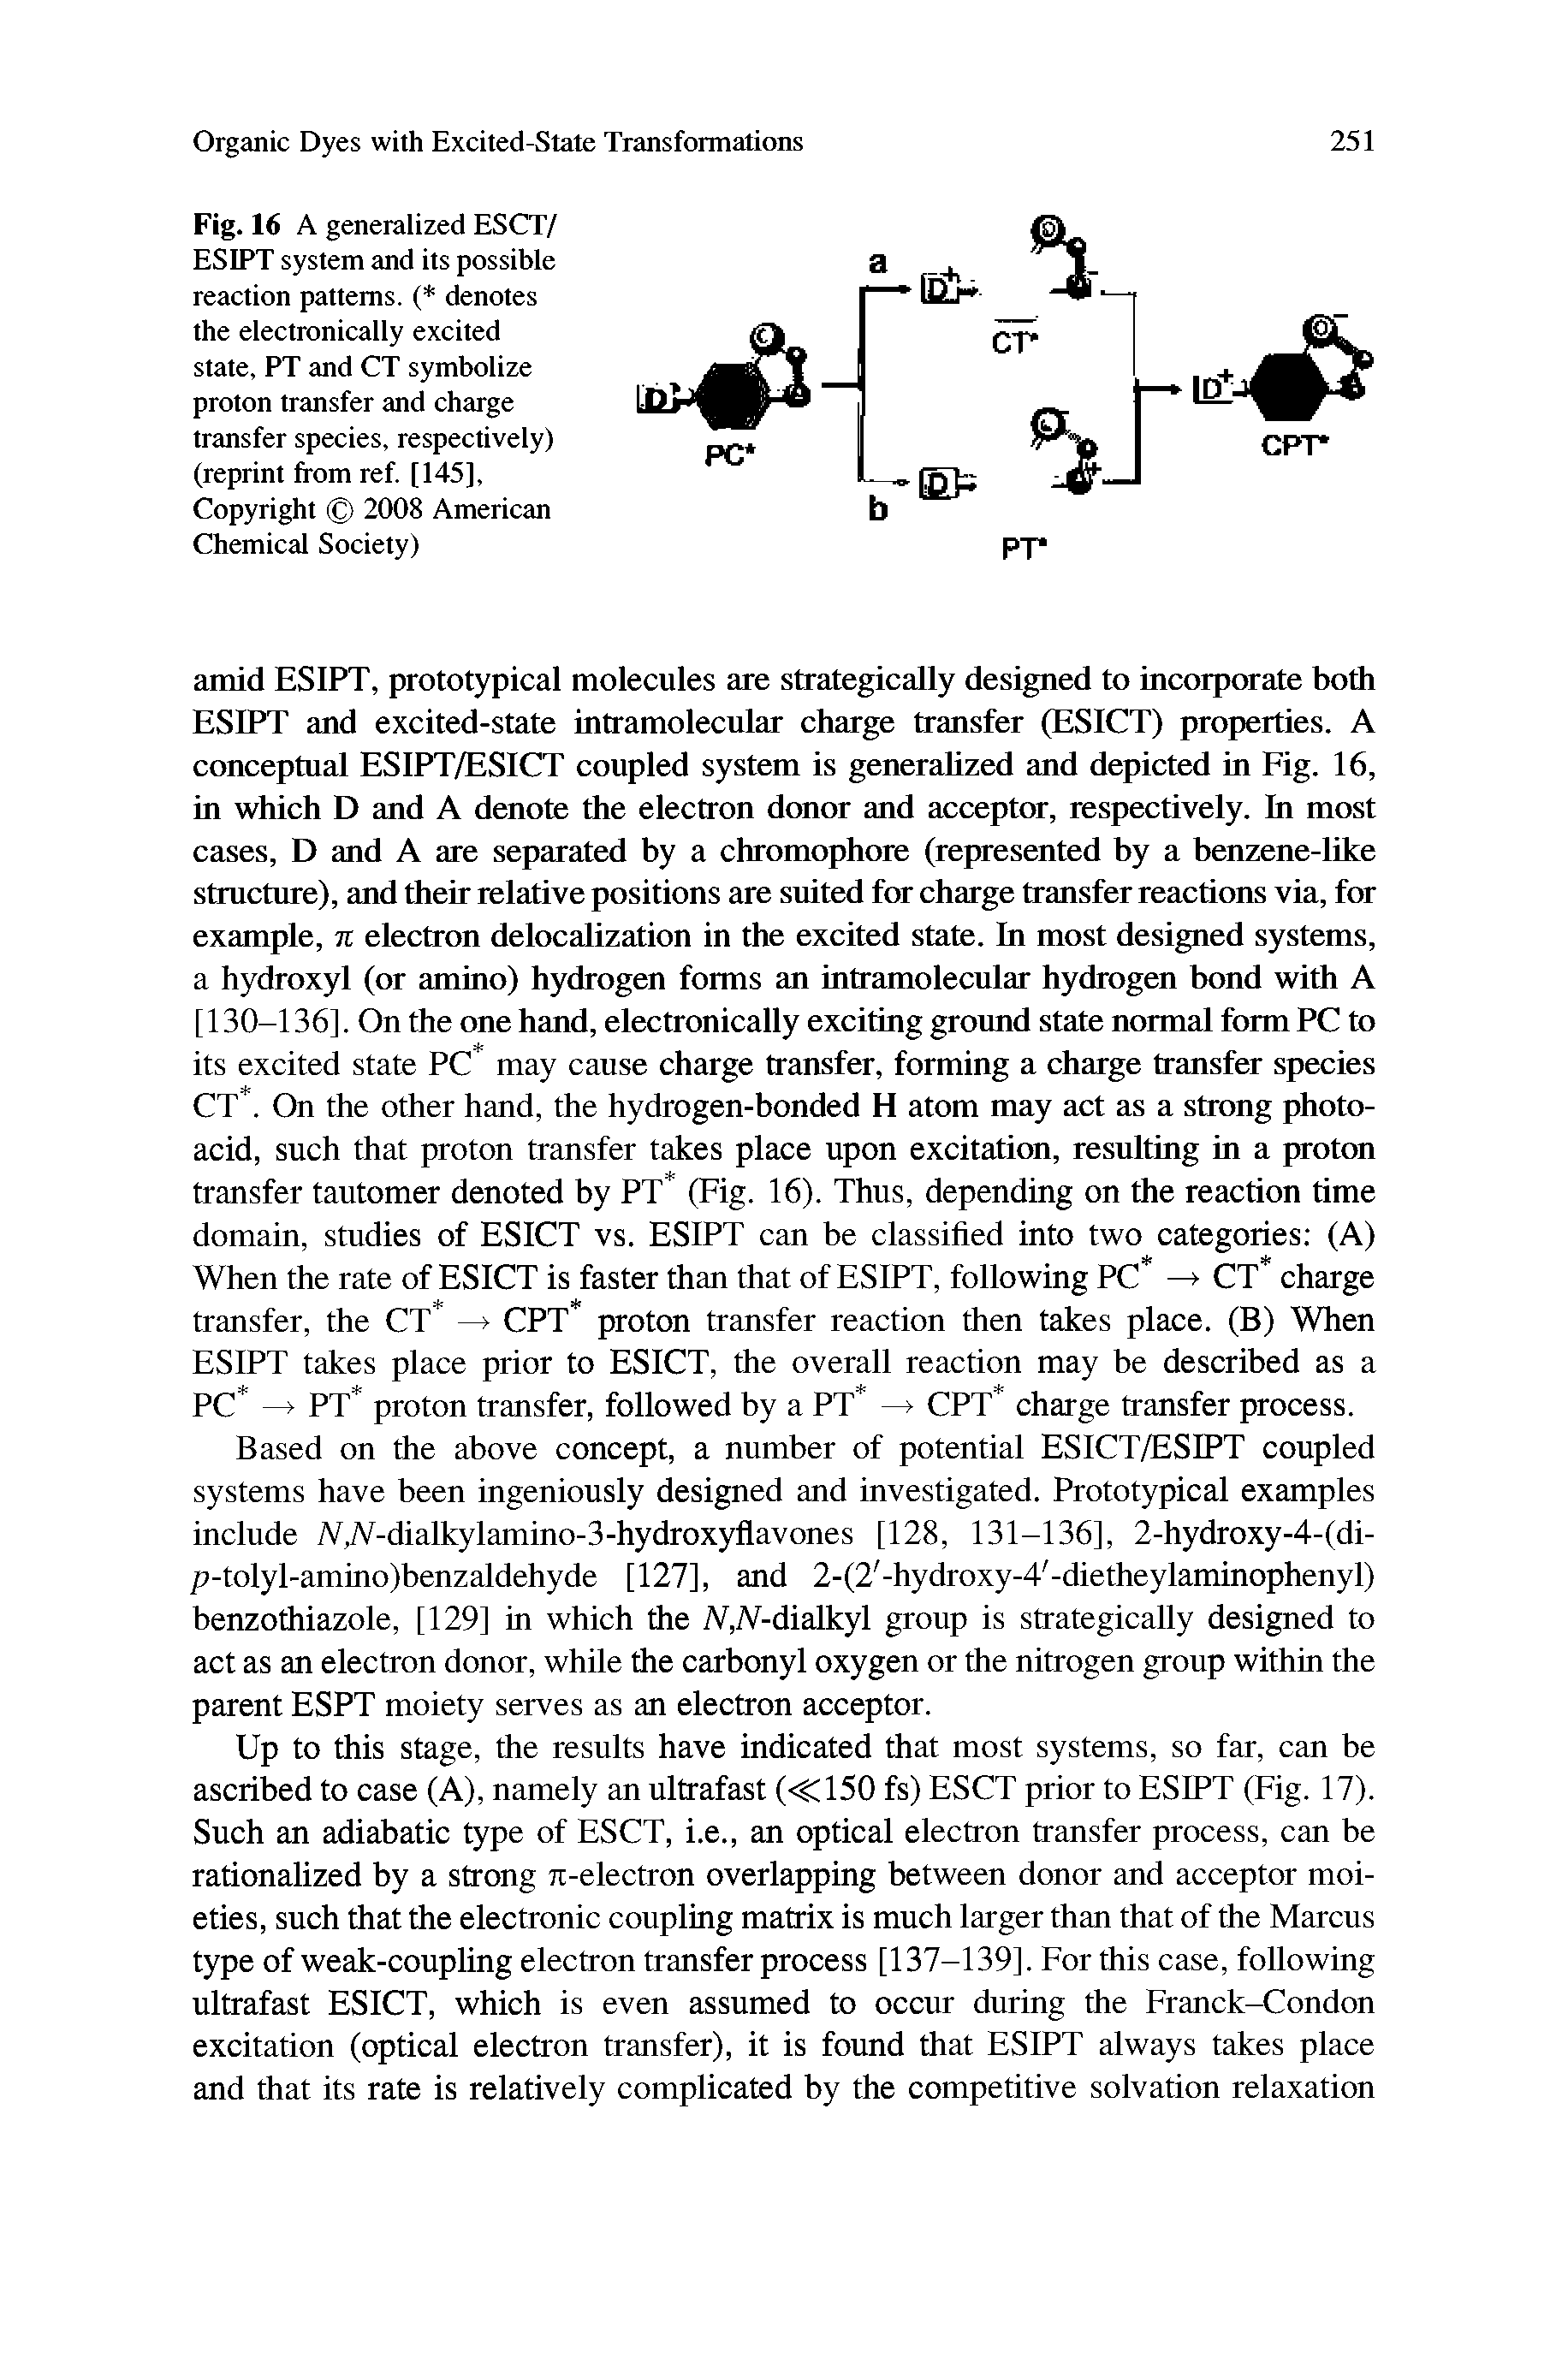 Fig. 16 A generalized ESCT/ ESIPT system and its possible reaction patterns. ( denotes the electronically excited state, PT and CT symbolize proton transfer and charge transfer species, respectively) (reprint from ref. [145], Copyright 2008 American Chemical Society)...